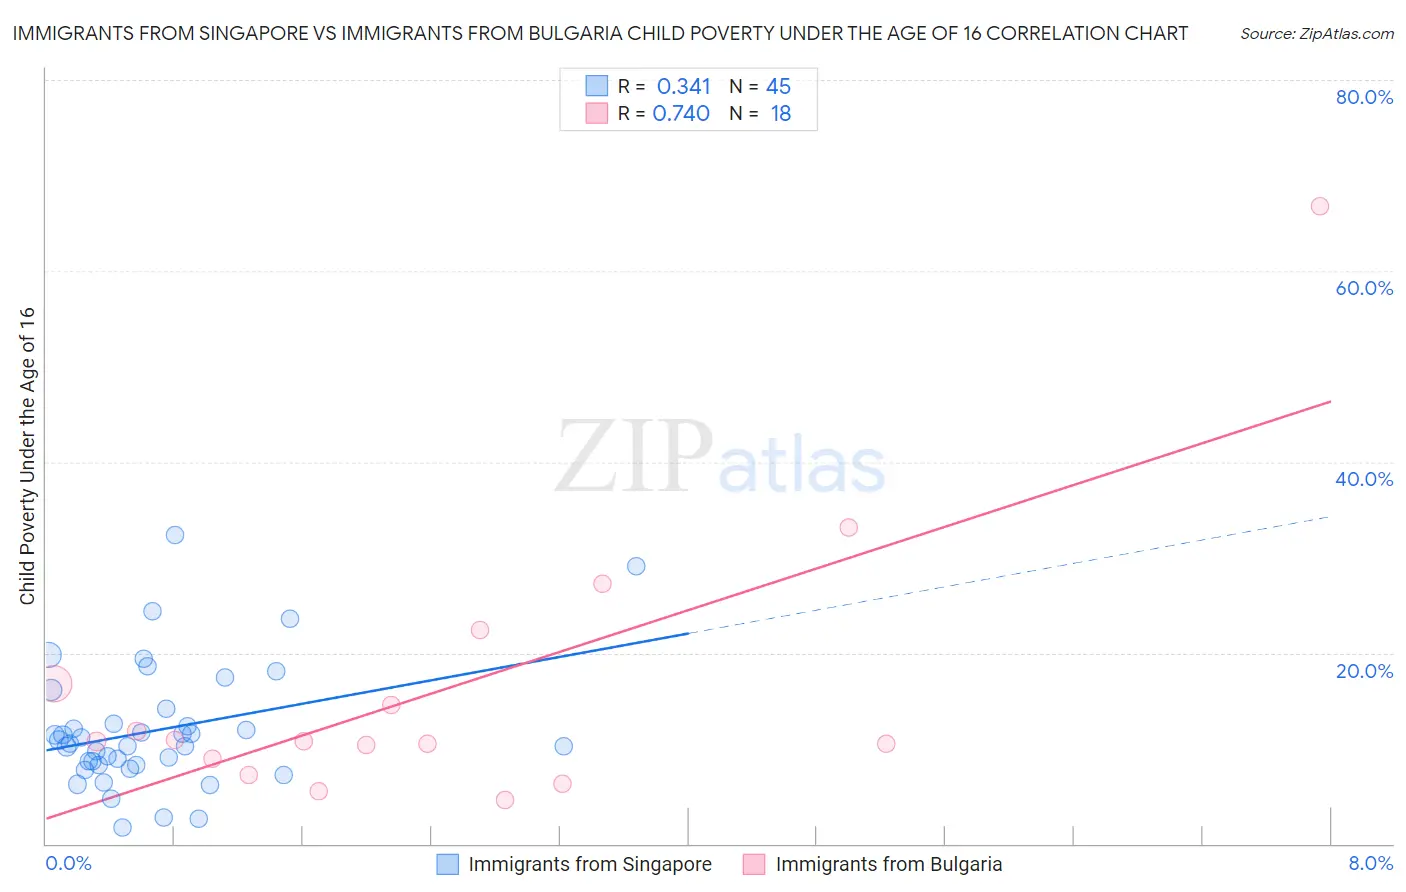 Immigrants from Singapore vs Immigrants from Bulgaria Child Poverty Under the Age of 16